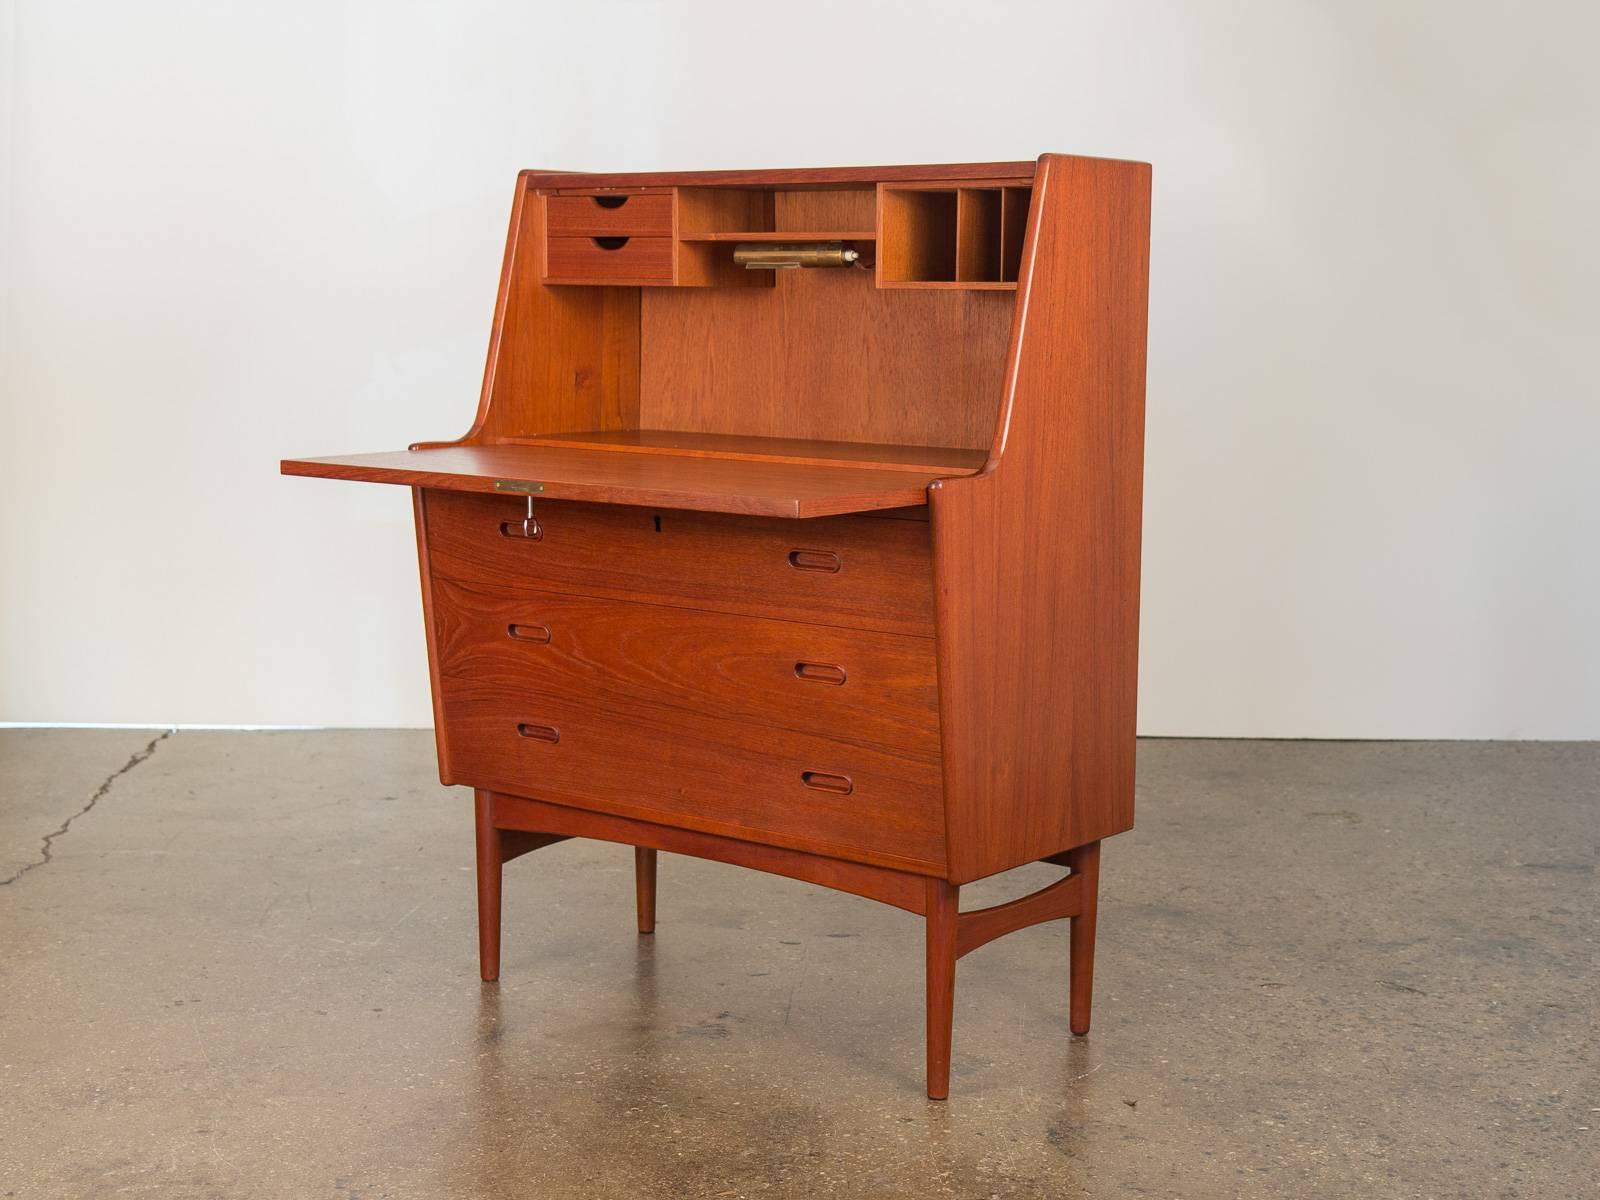 Beautiful Danish modern cabinet designed by Arne Wahl Iversen in the 1960s. A key opens the desk top, which flips down to reveal mini drawers, letter organizers and a built-in light. Add a mirror and this piece could work as a vanity, too. Three